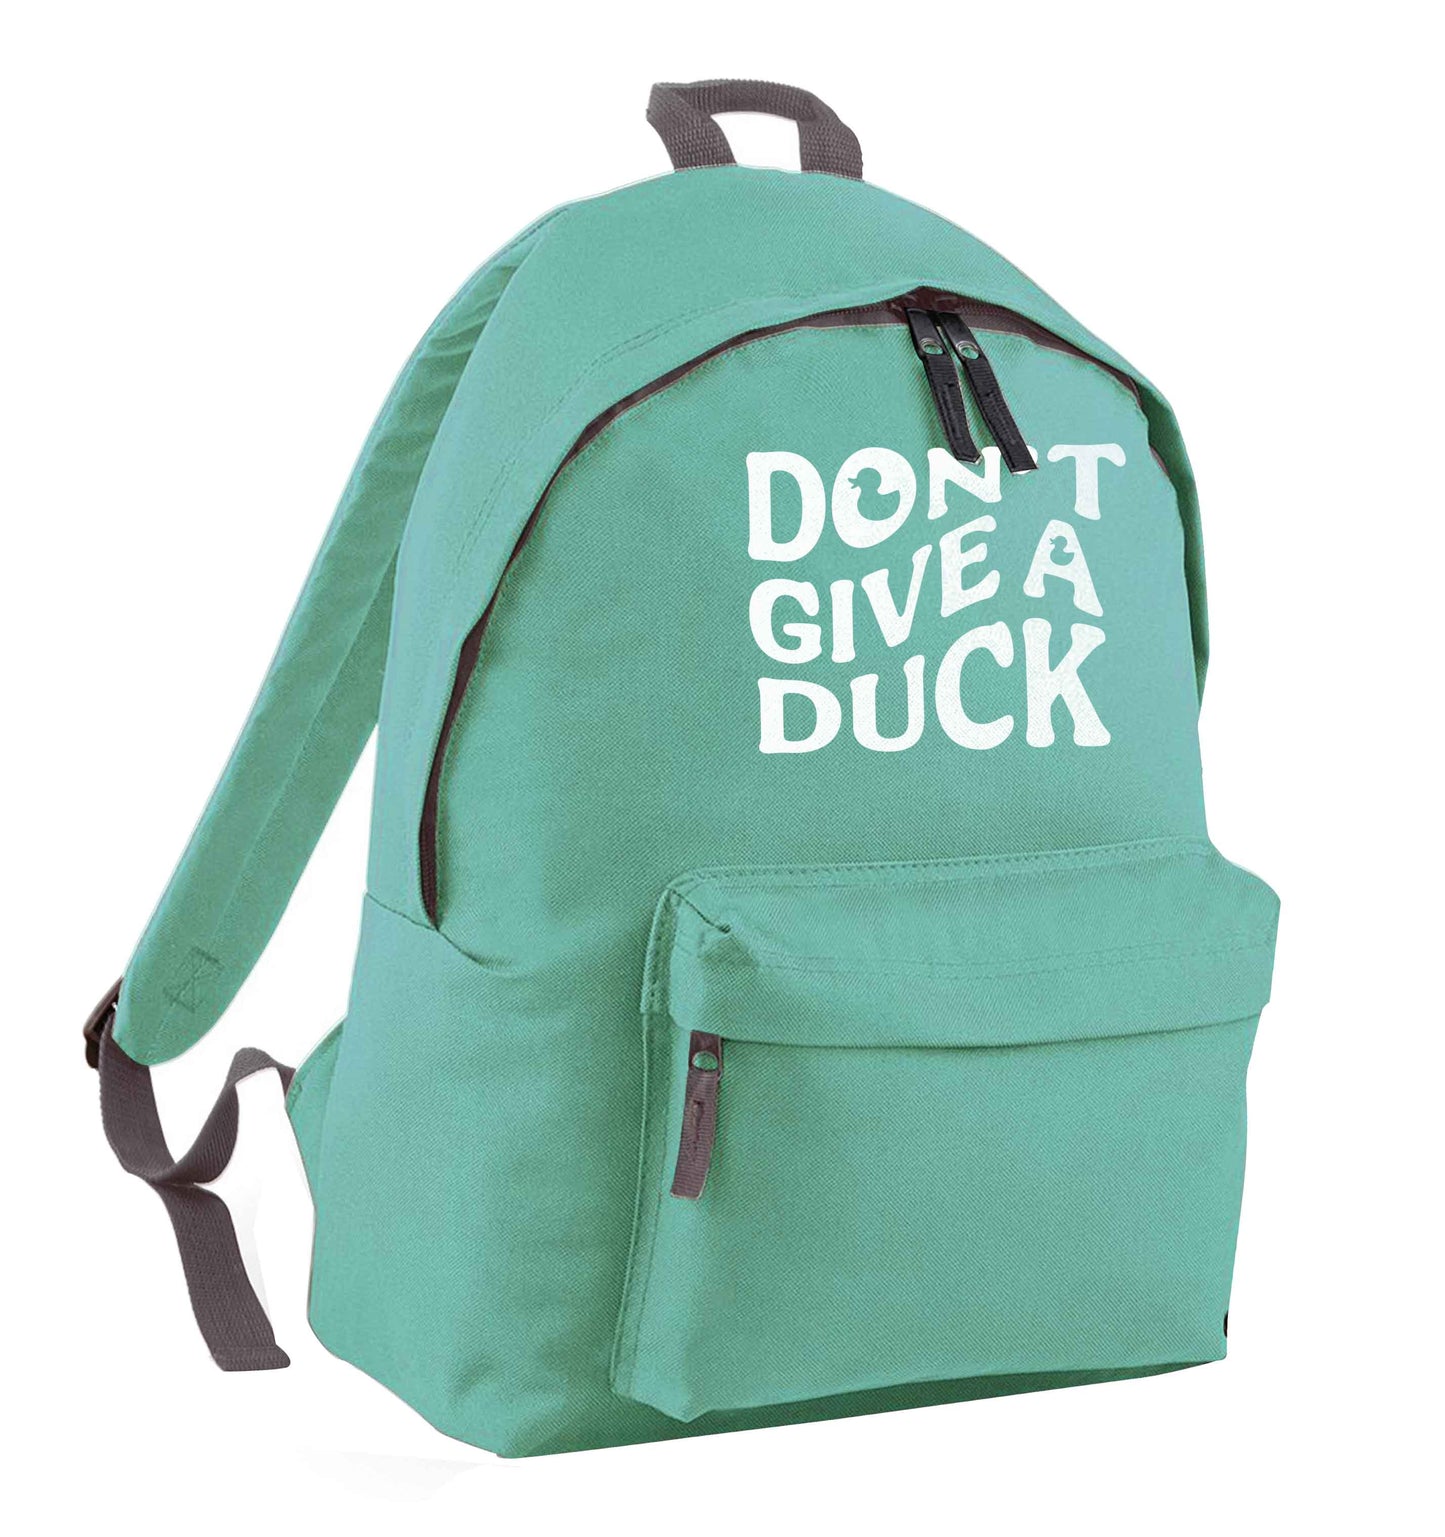 Don't give a duck mint adults backpack